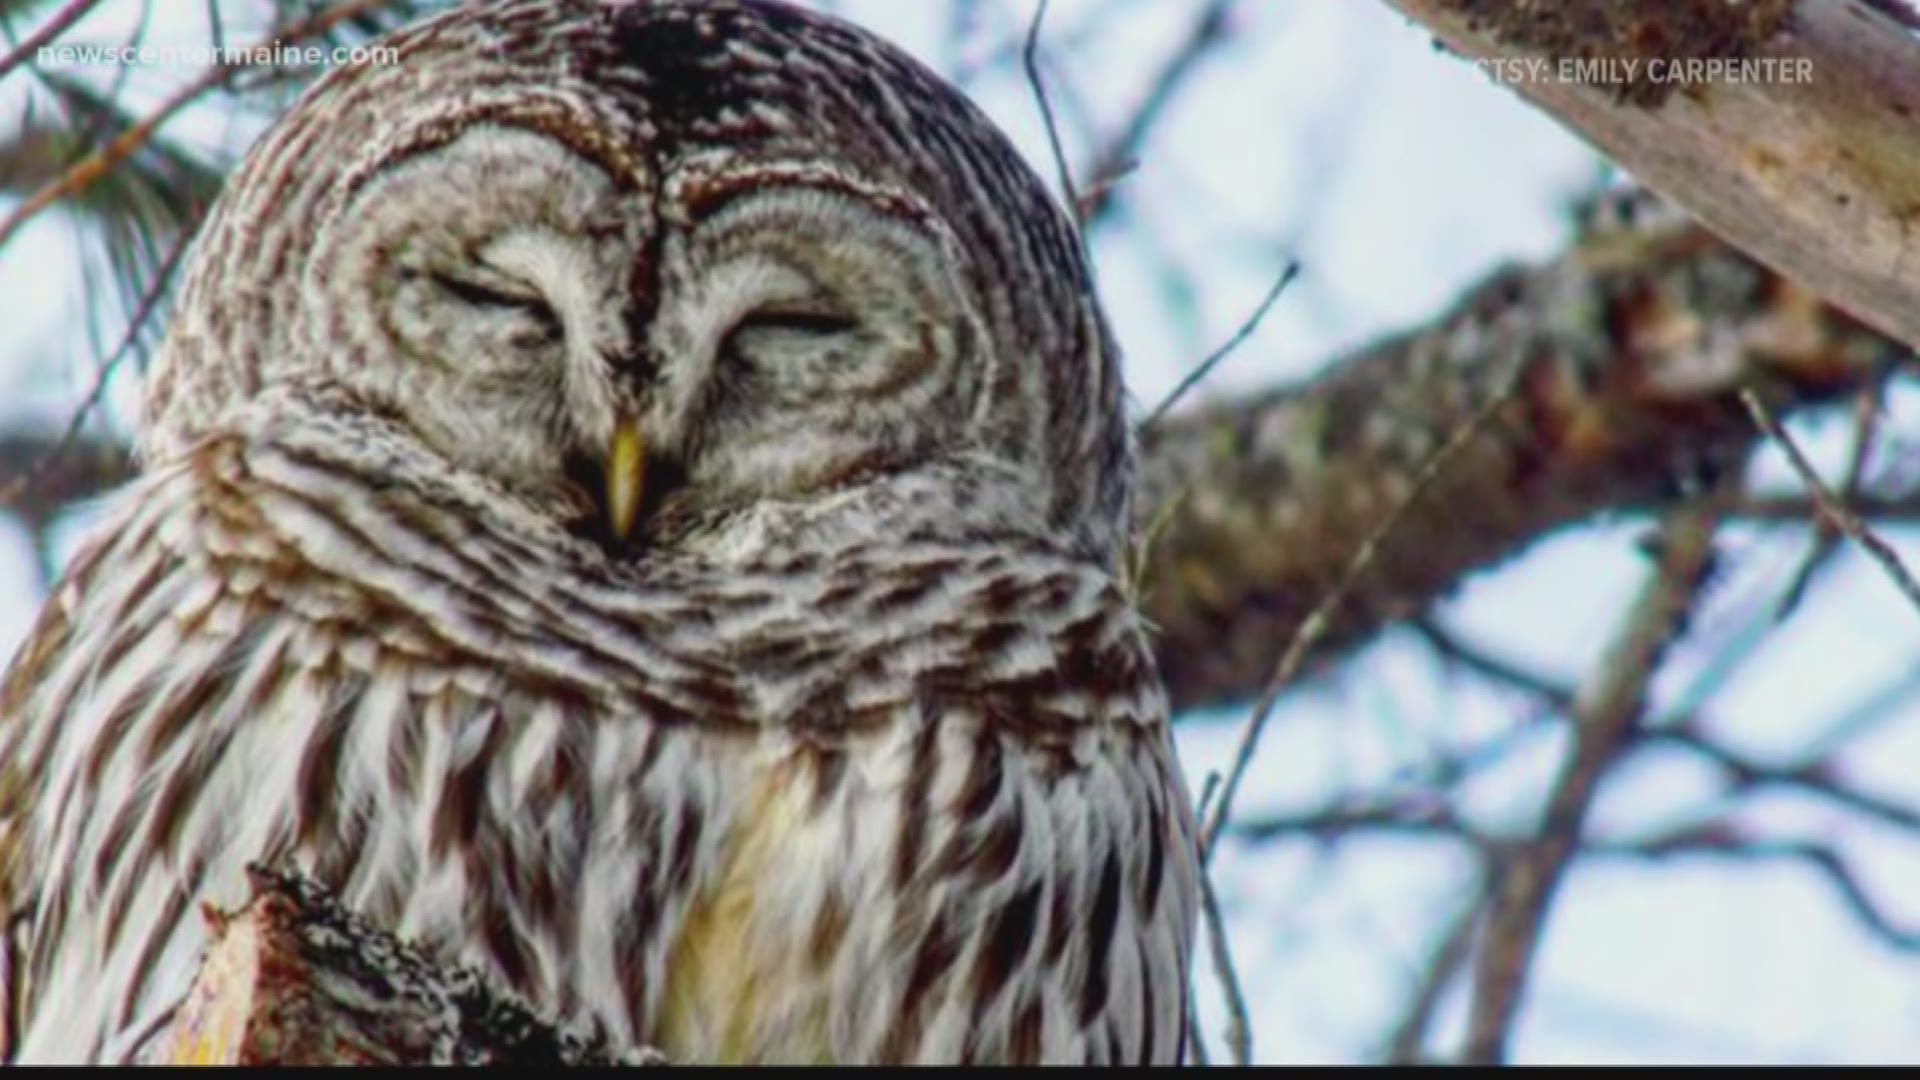 A barred owl visited this viewer's home in West Baldwin.